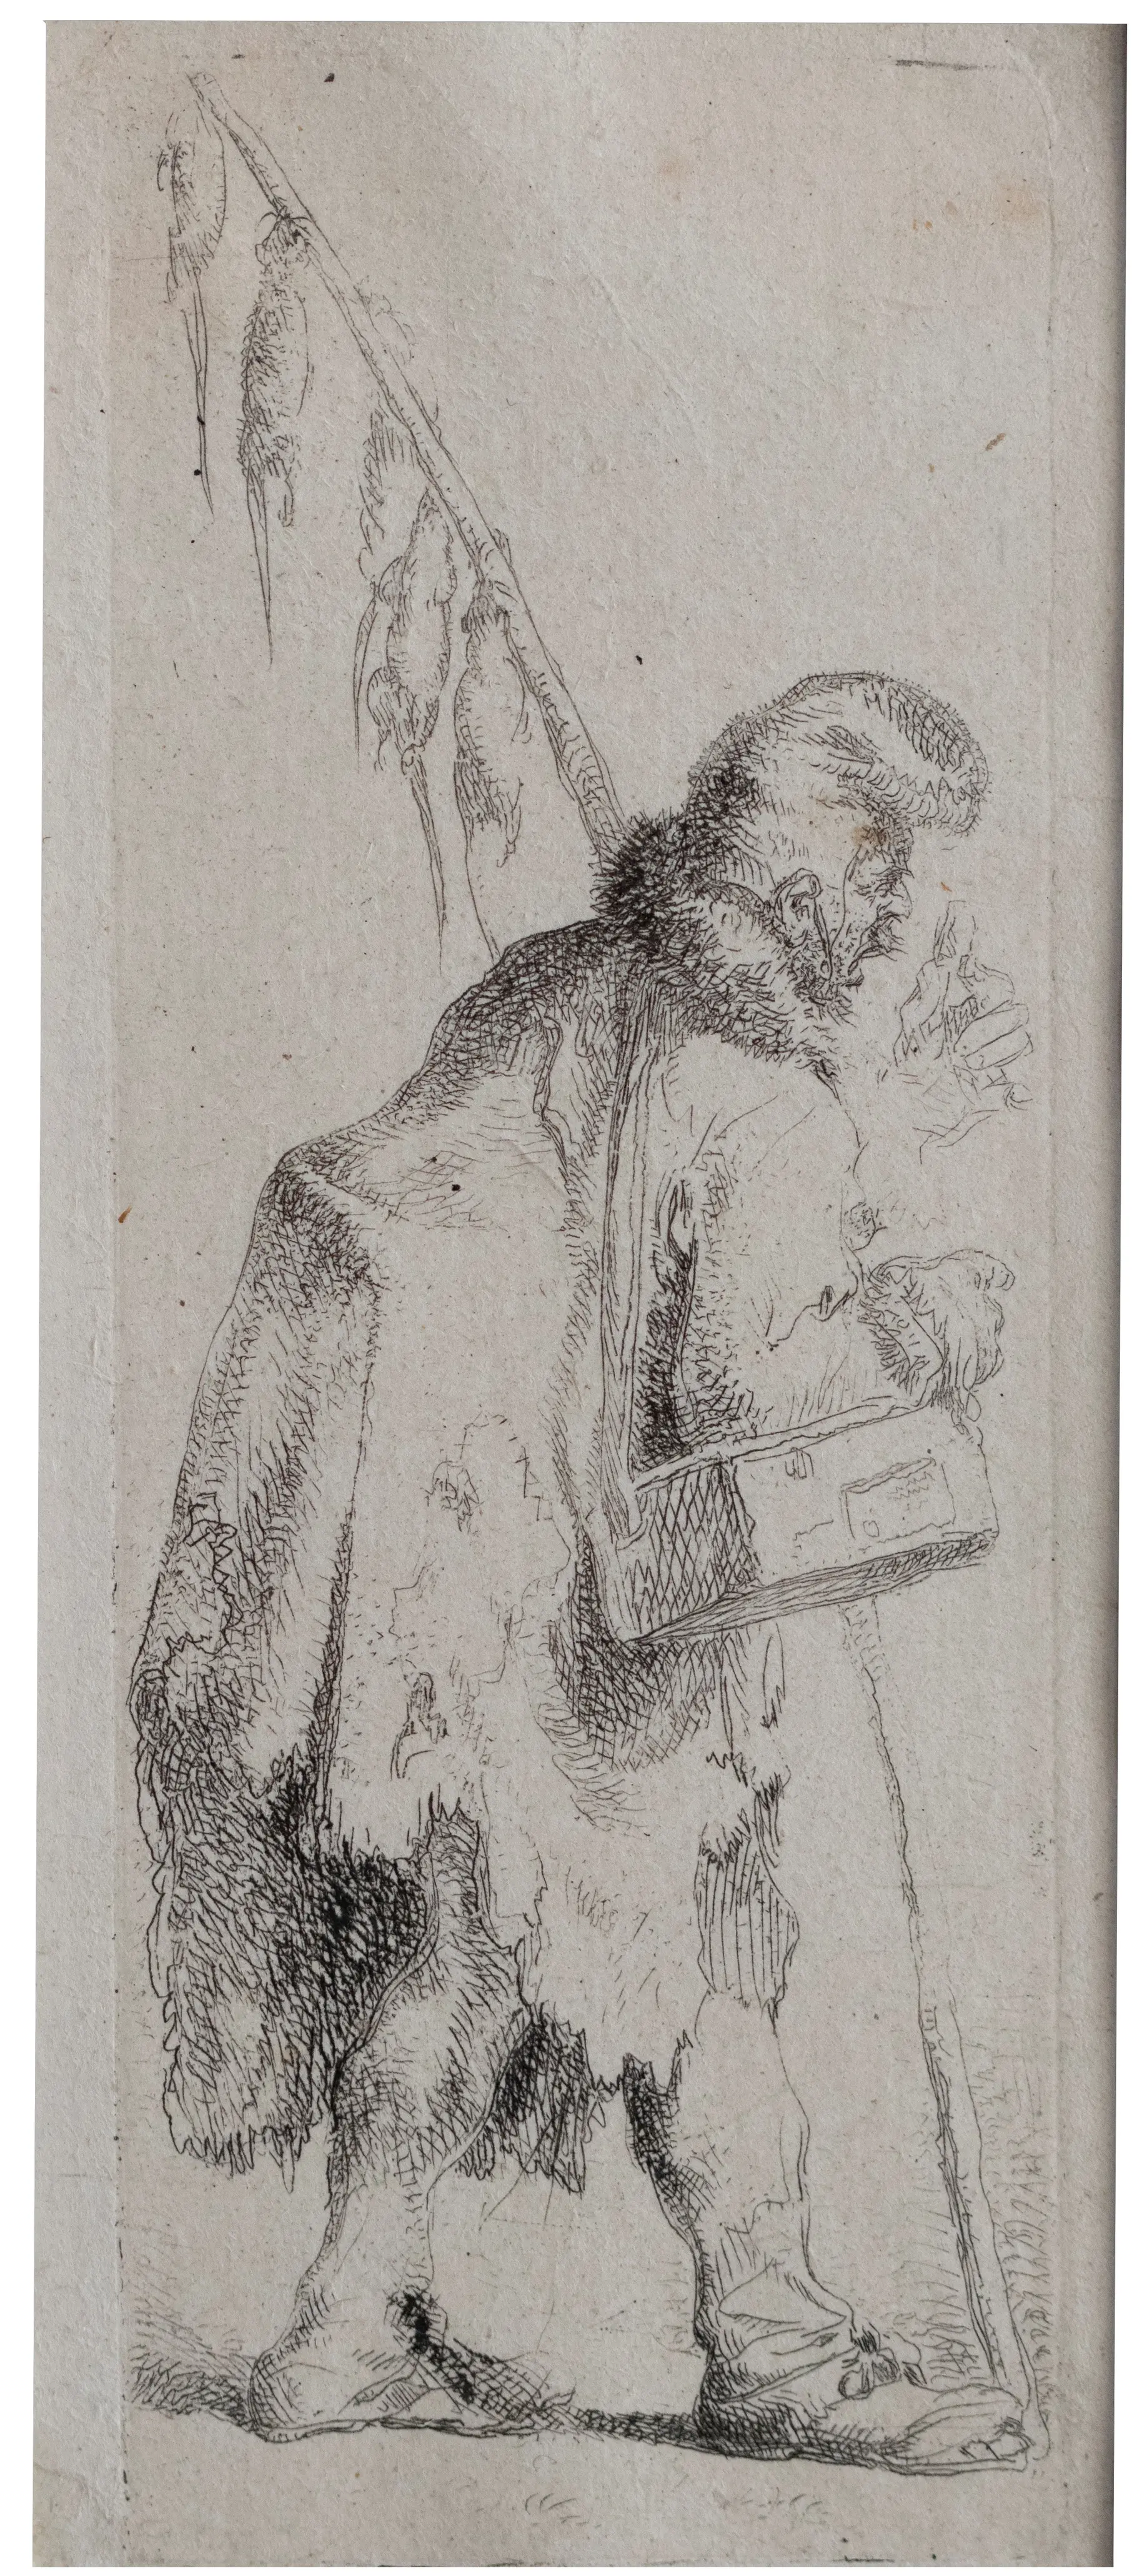 Poison seller, etching